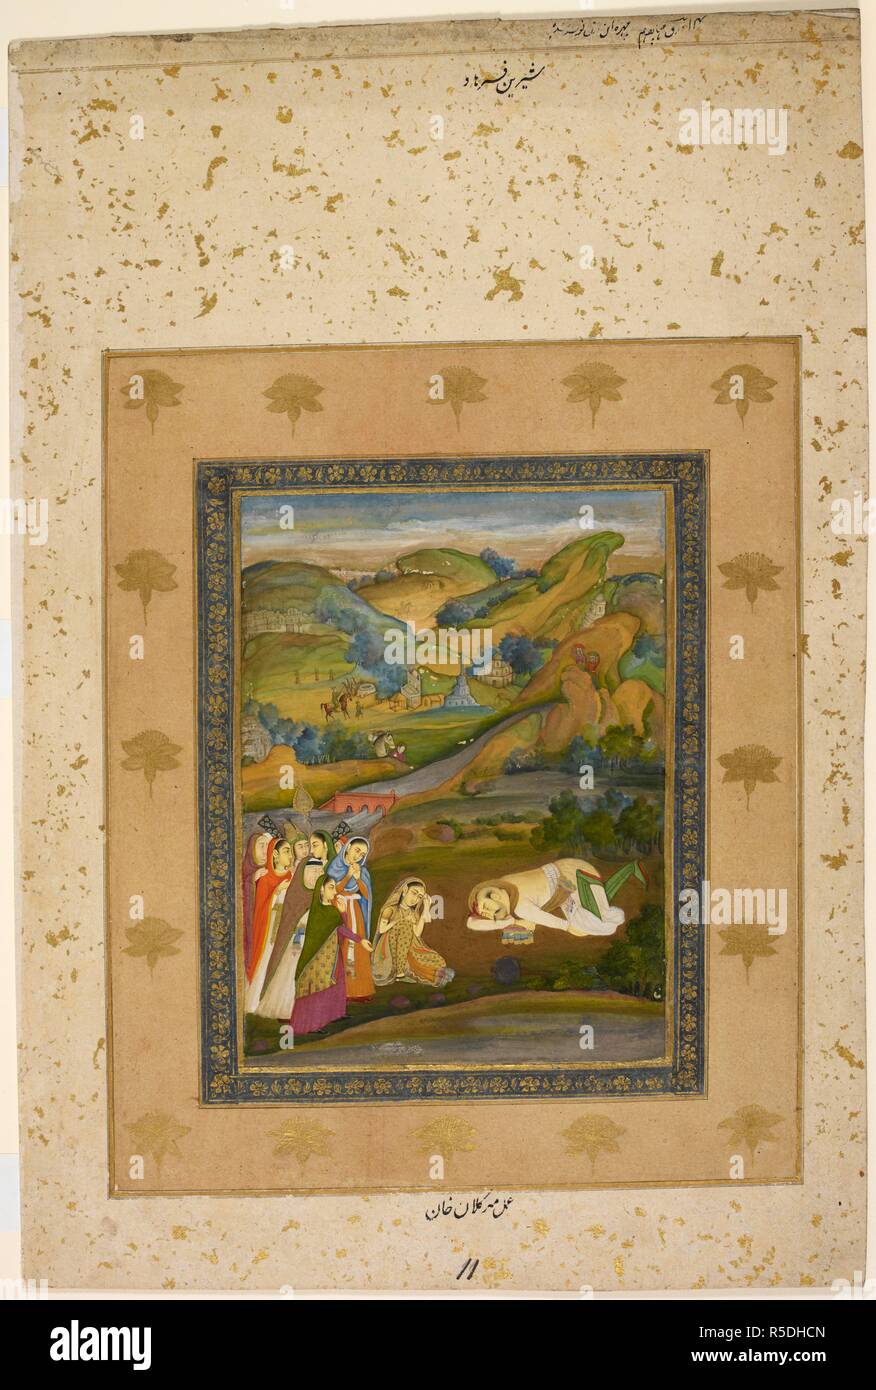 An illustration of Nizami's story of Khusraw & Shirin showing the death of Farhad who has fallen from Mount Behistun. Shirin kneels at his side and her ladies stand behind her bemoaning the occurrence. A Europeanised landscape in the distance includes clumps of trees, buildings and a scene at a well. c.1770. Opaque watercolour. Source: J.9,11. Author: Mir Kalan Khan. Stock Photo